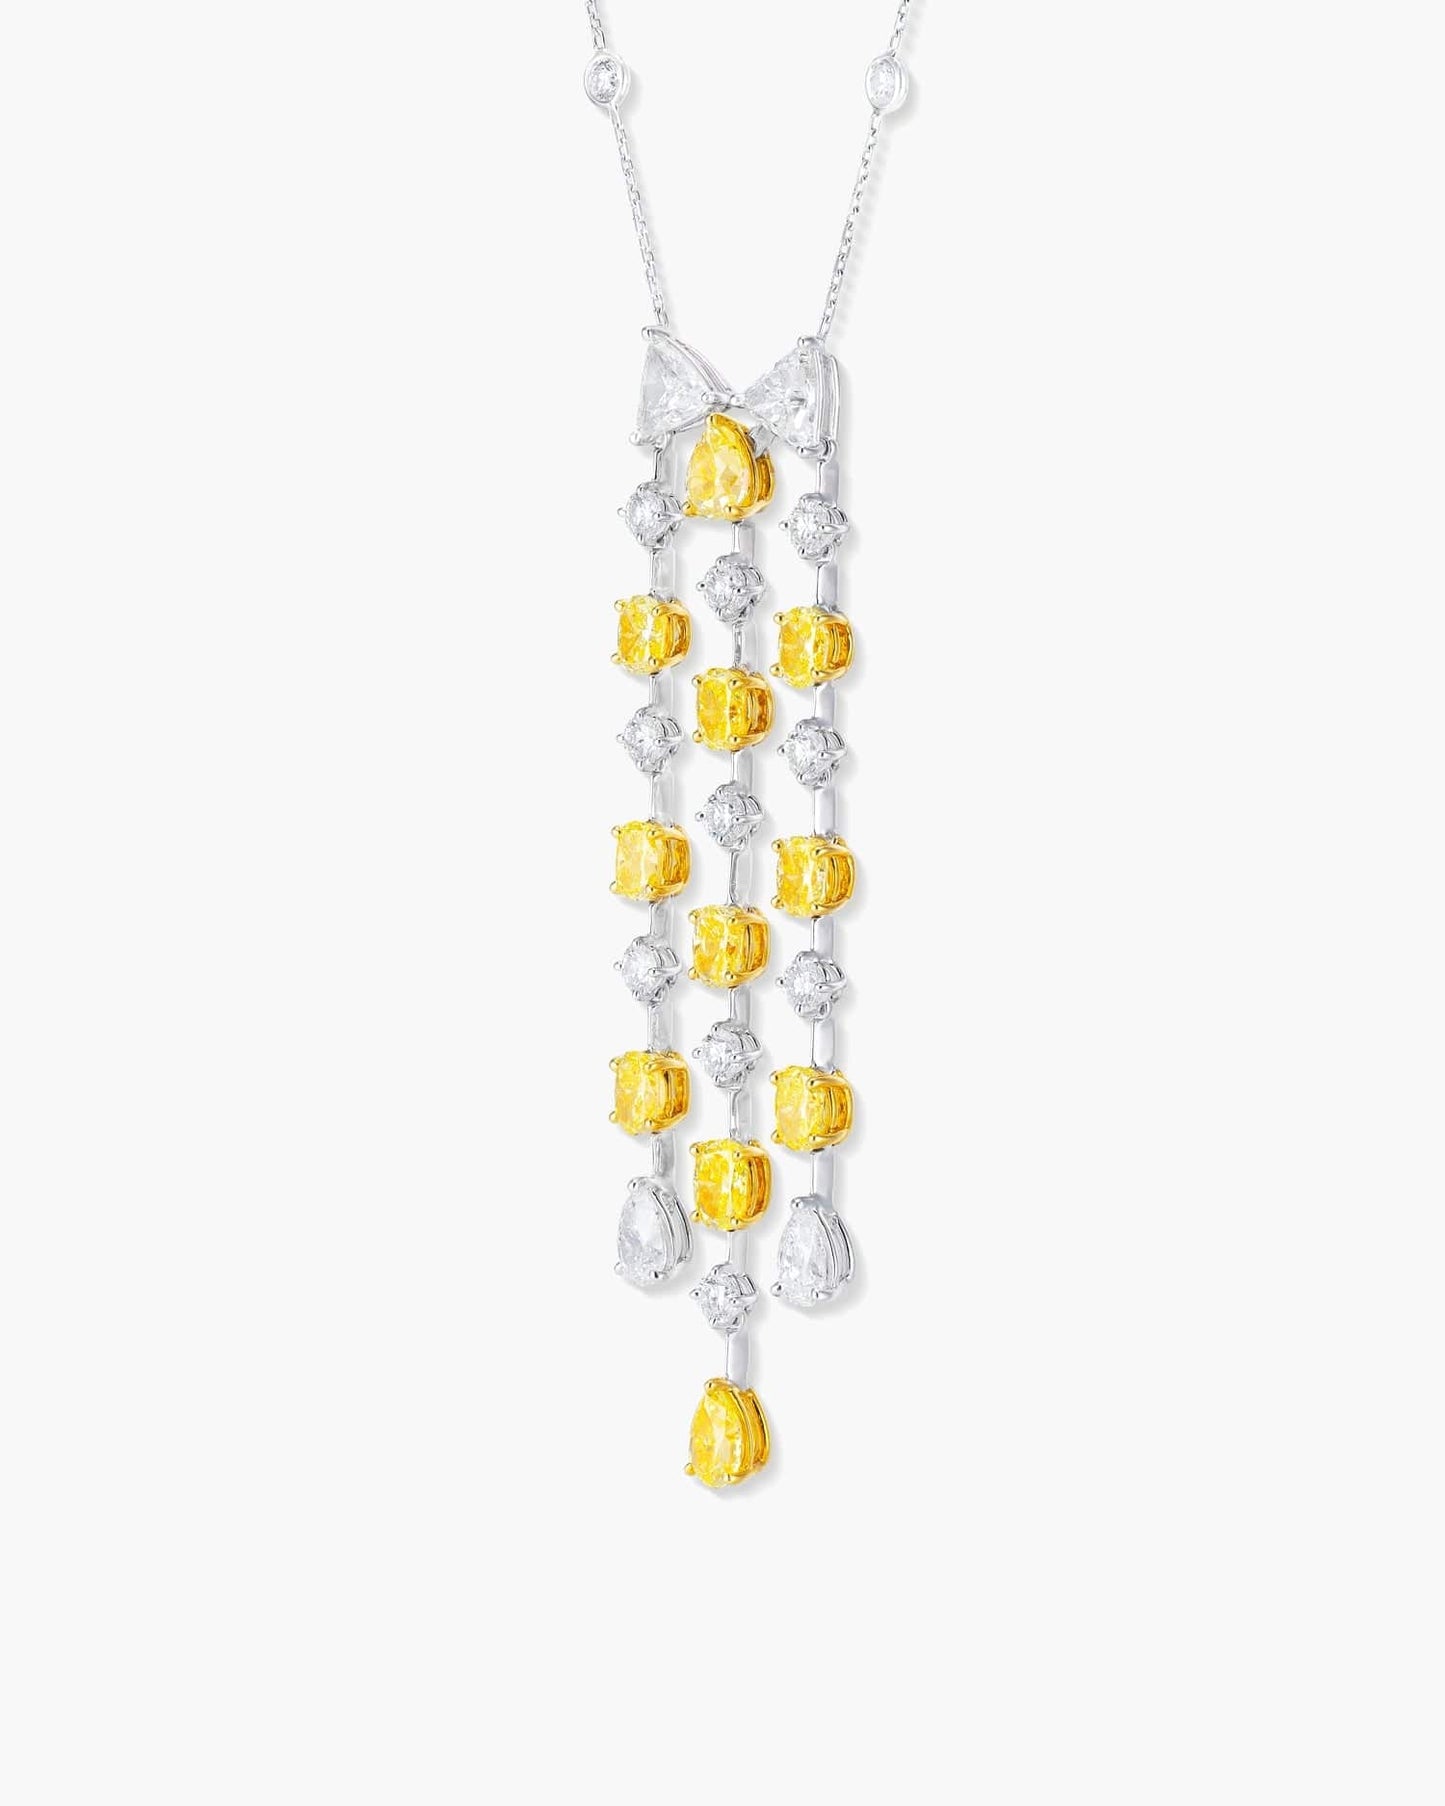 Fancy Shaped Yellow and White Diamond Necklace, 8.60 carats